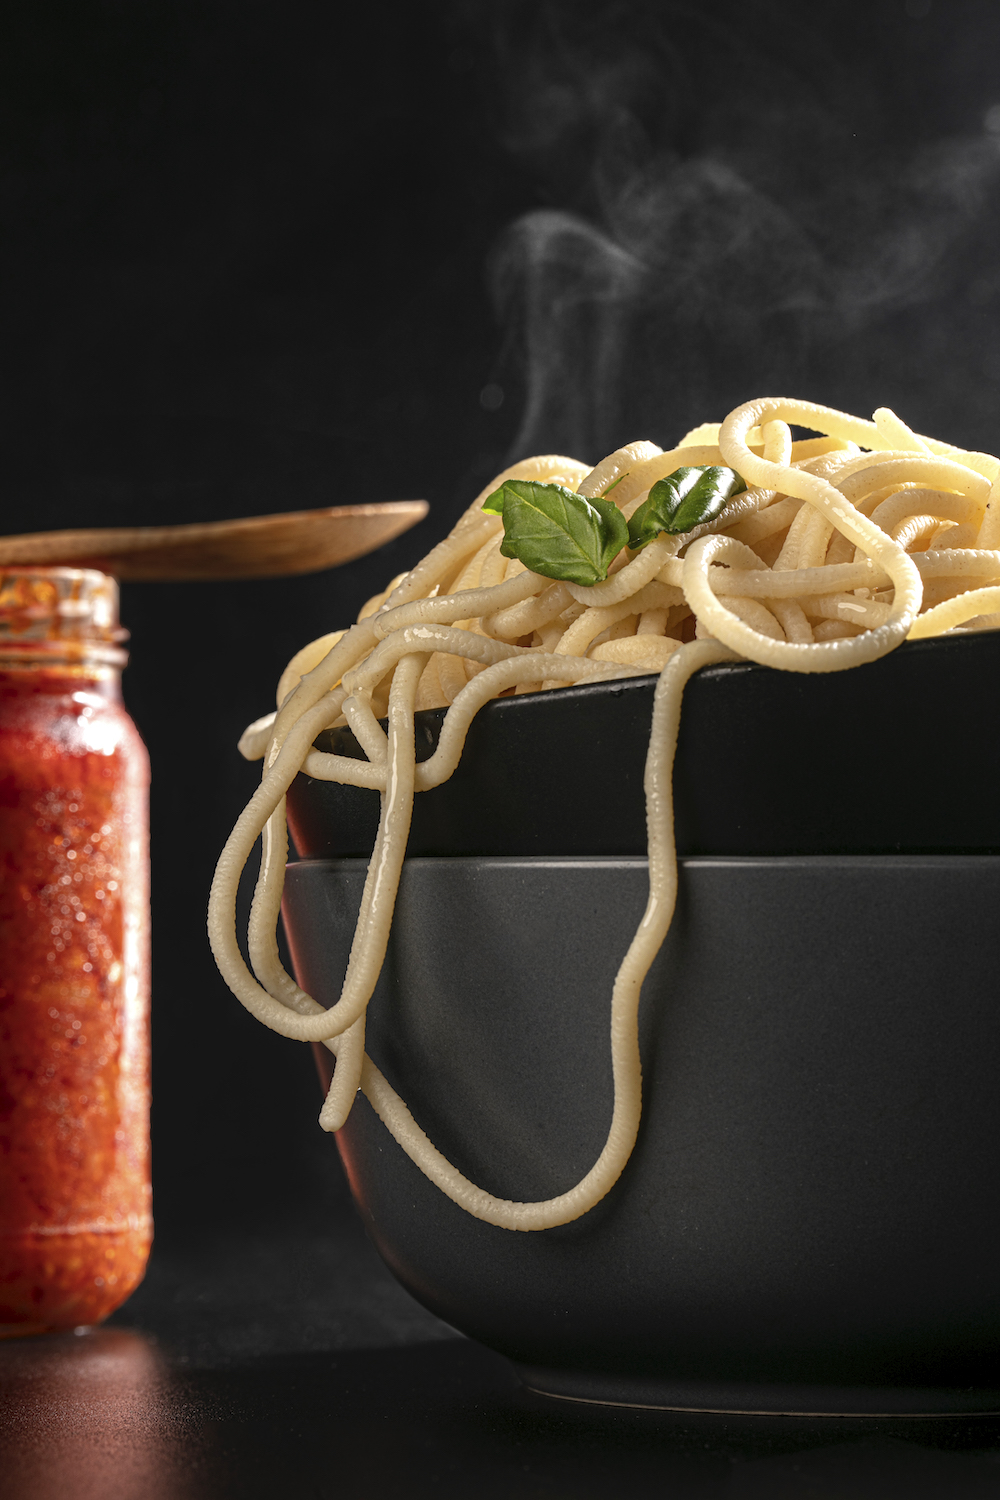 Because of brass dies in the machine, the texture of Conspire Foods spaghetti has scratches that allows it to hold on to more sauce